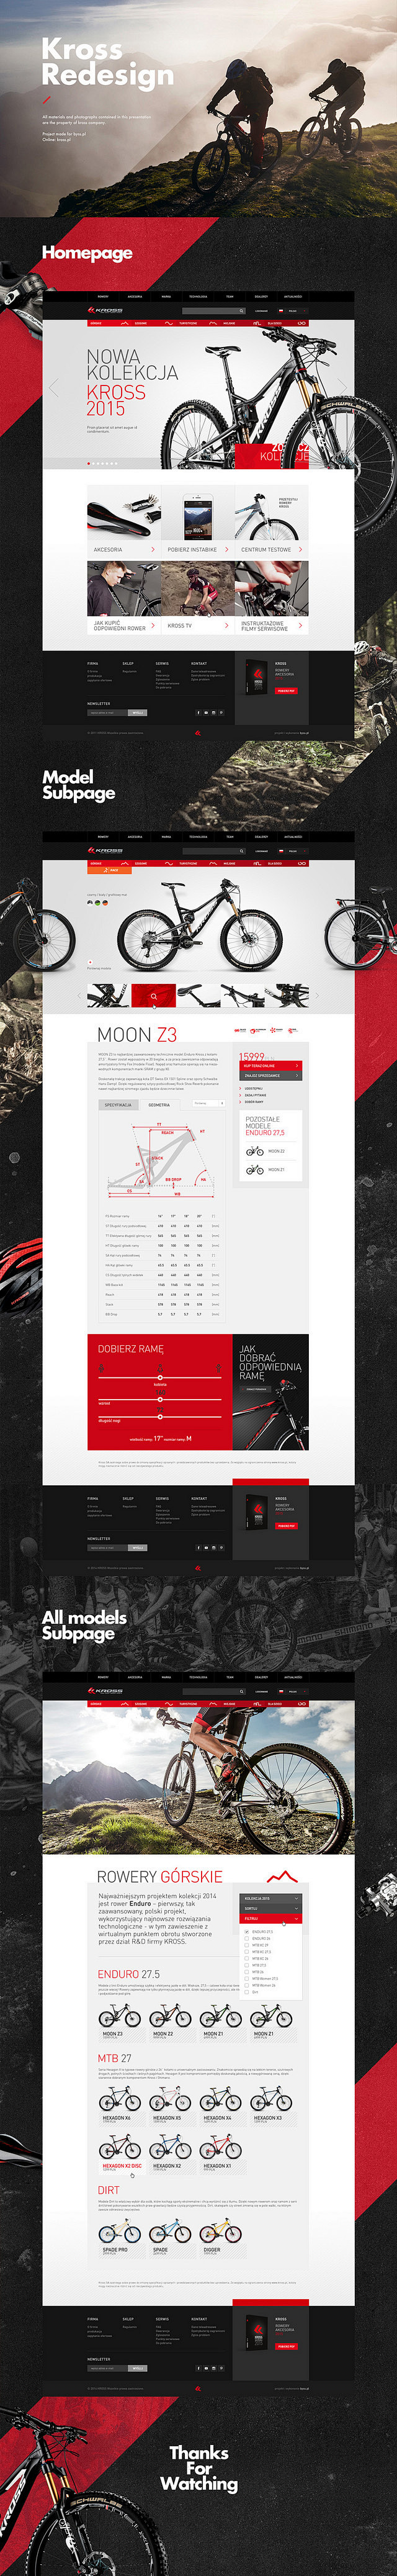 Kross.pl redesign by...